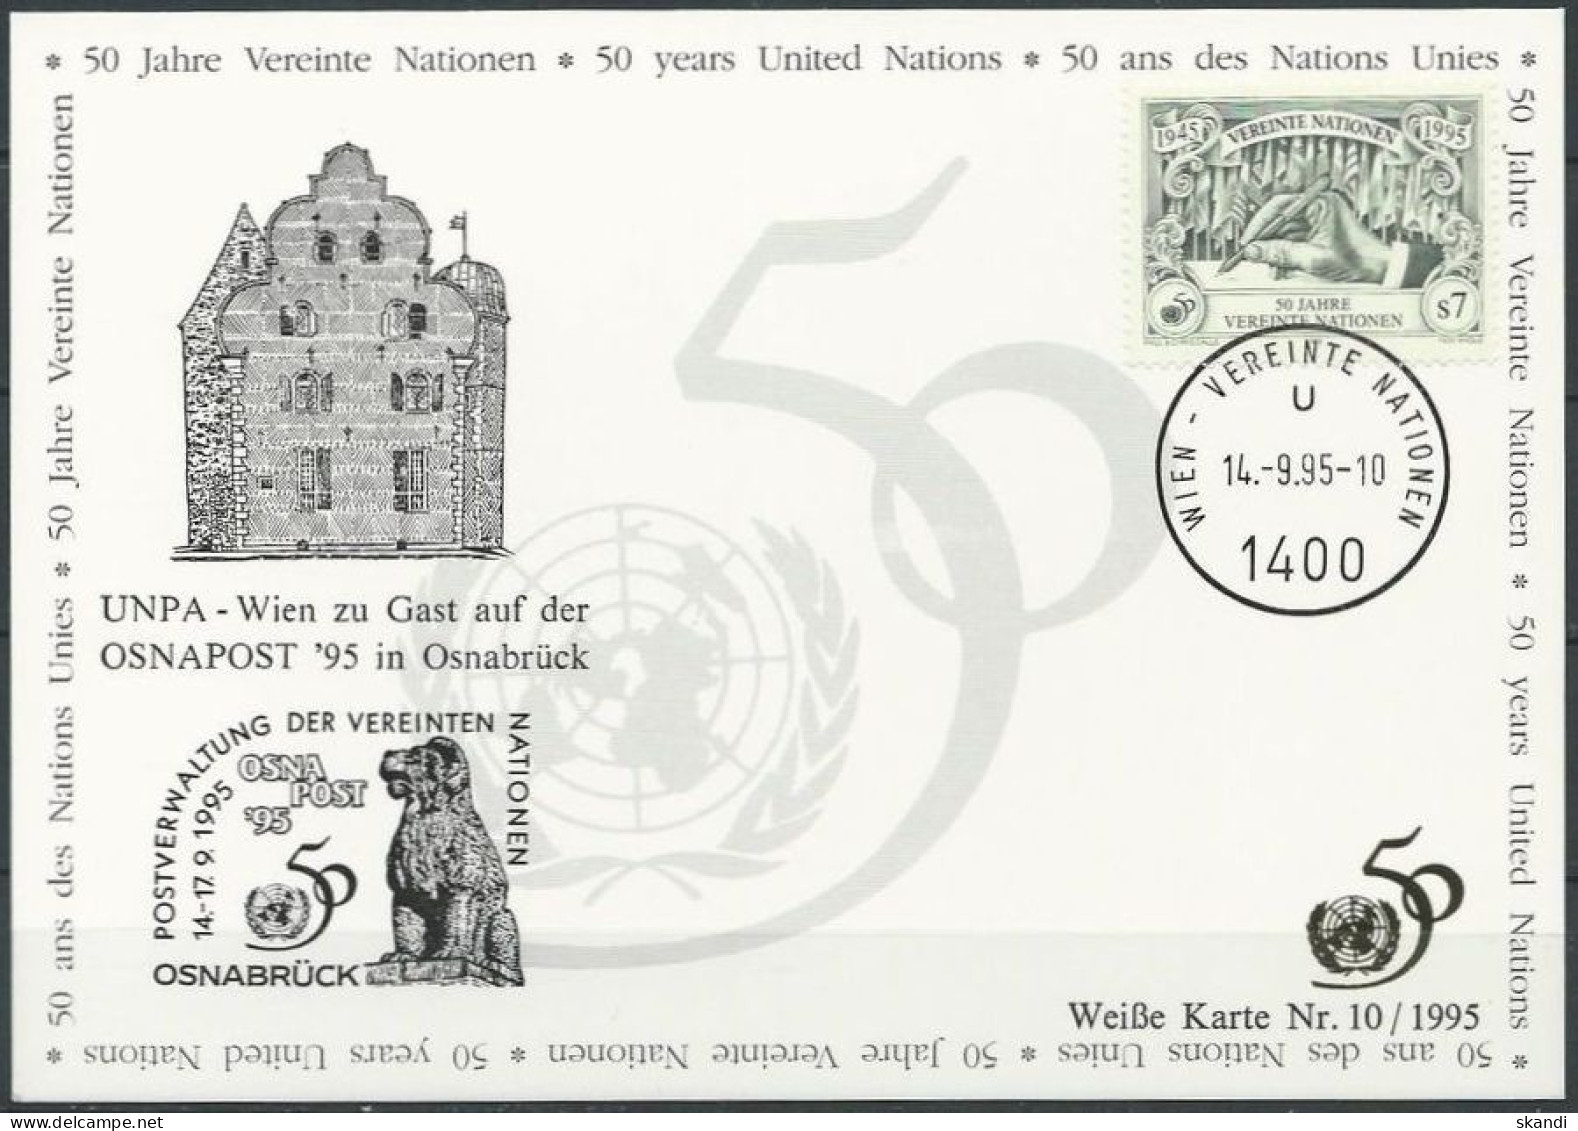 UNO WIEN 1995 Mi-Nr. 160 WEISSE KARTE - OSNAPOST OSNABRÜCK 14.09.1995 - Covers & Documents